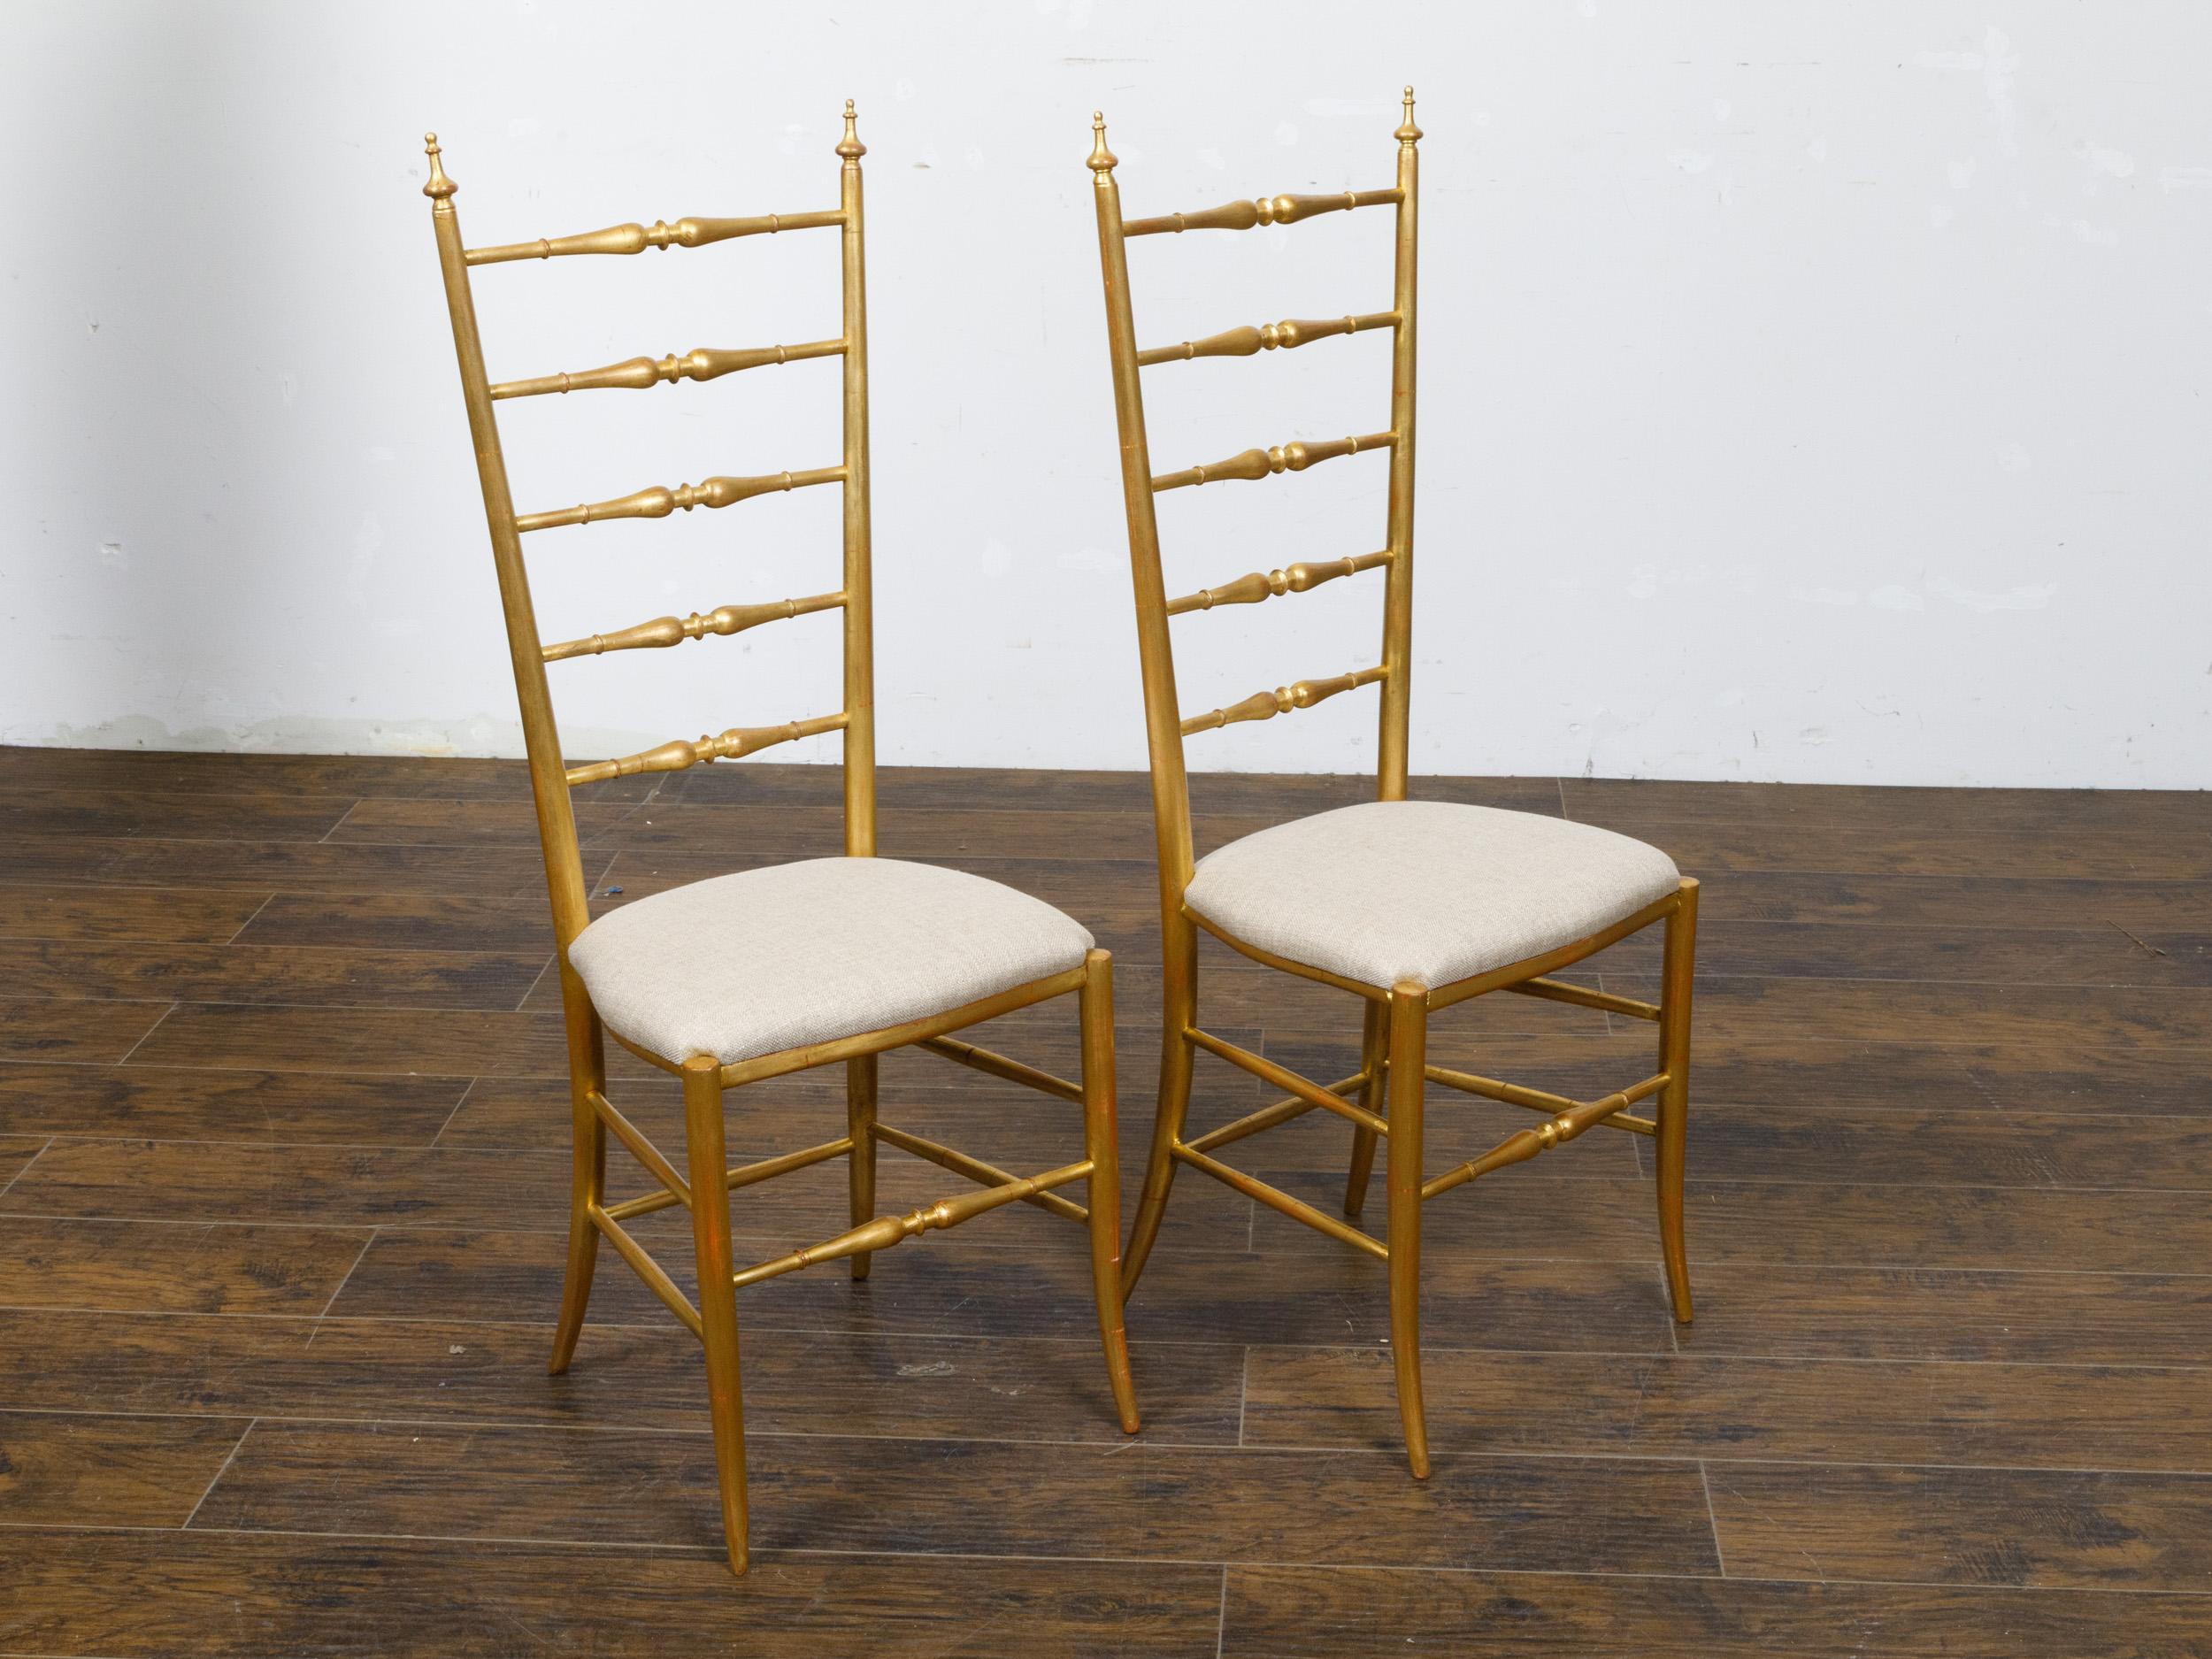 Pair of Midcentury Italian Gilt Wood High Back Side Chairs with Upholstery For Sale 1